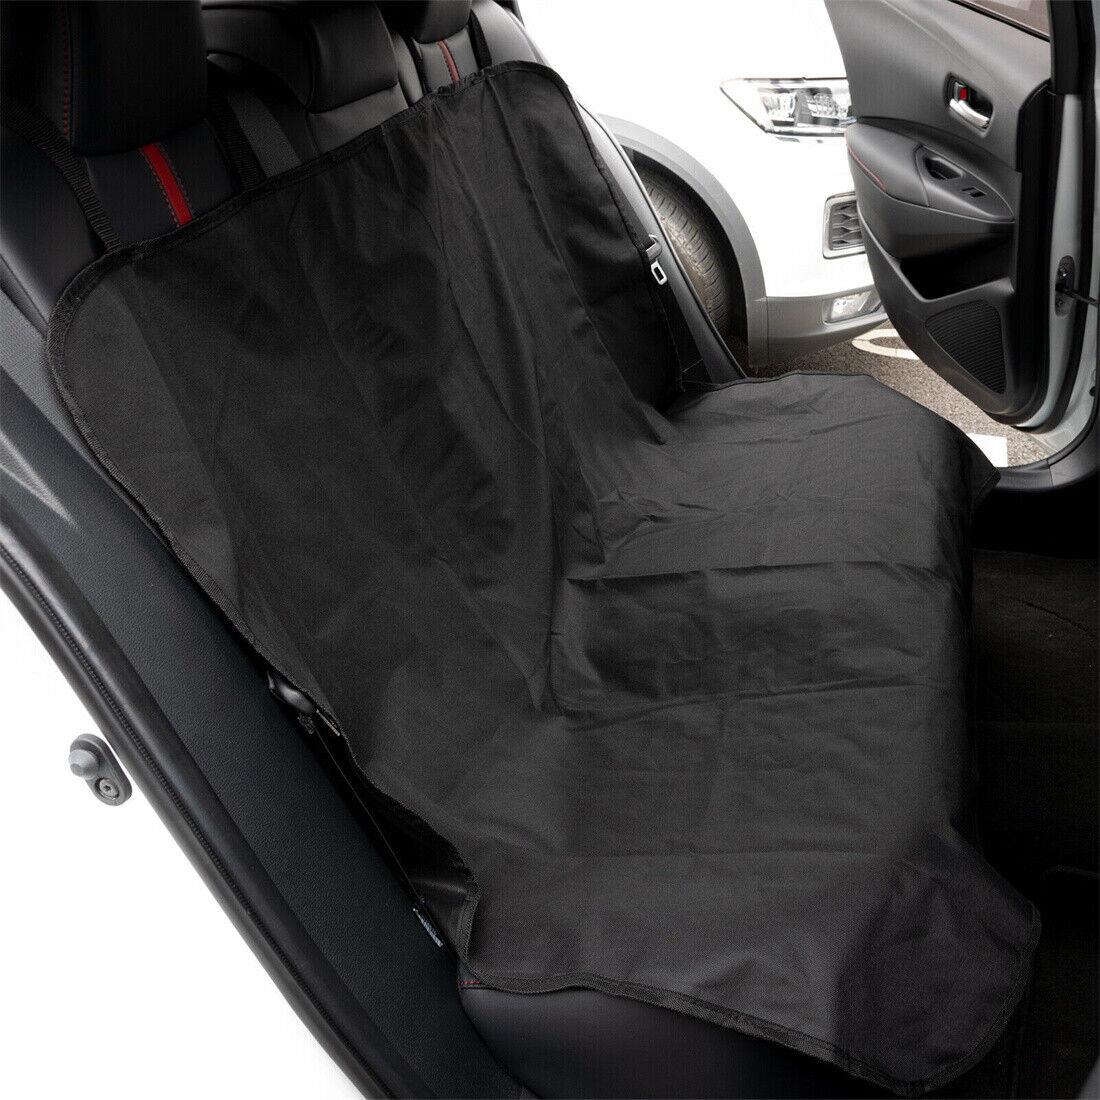 Pet Car Rear Seat Cover Waterproof and Nonslip by GEEZY - UKBuyZone